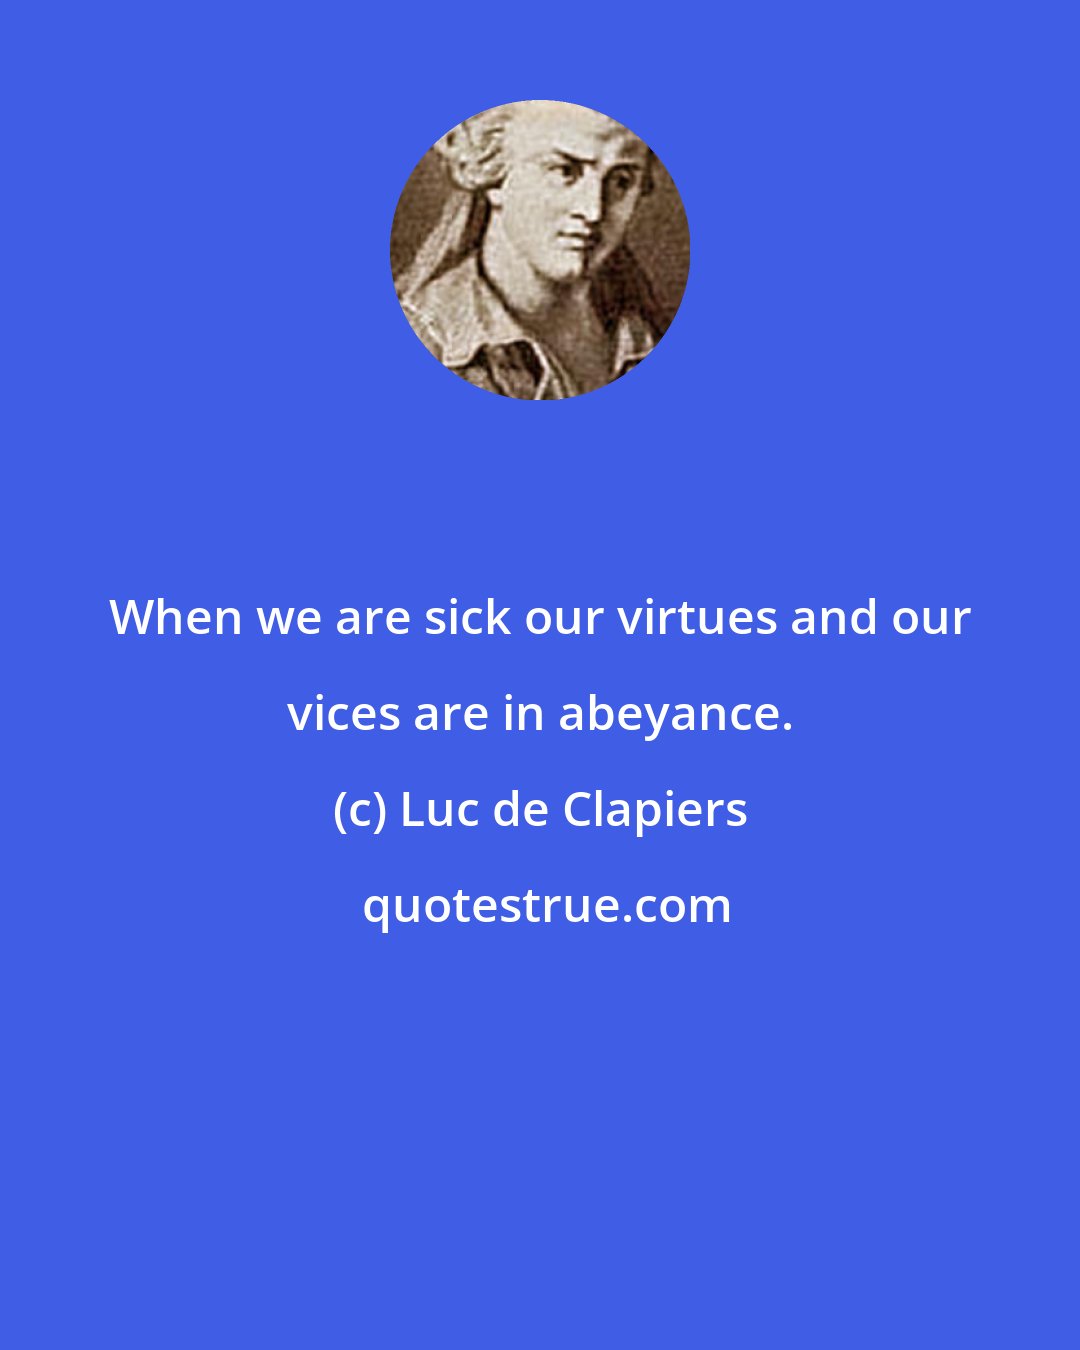 Luc de Clapiers: When we are sick our virtues and our vices are in abeyance.